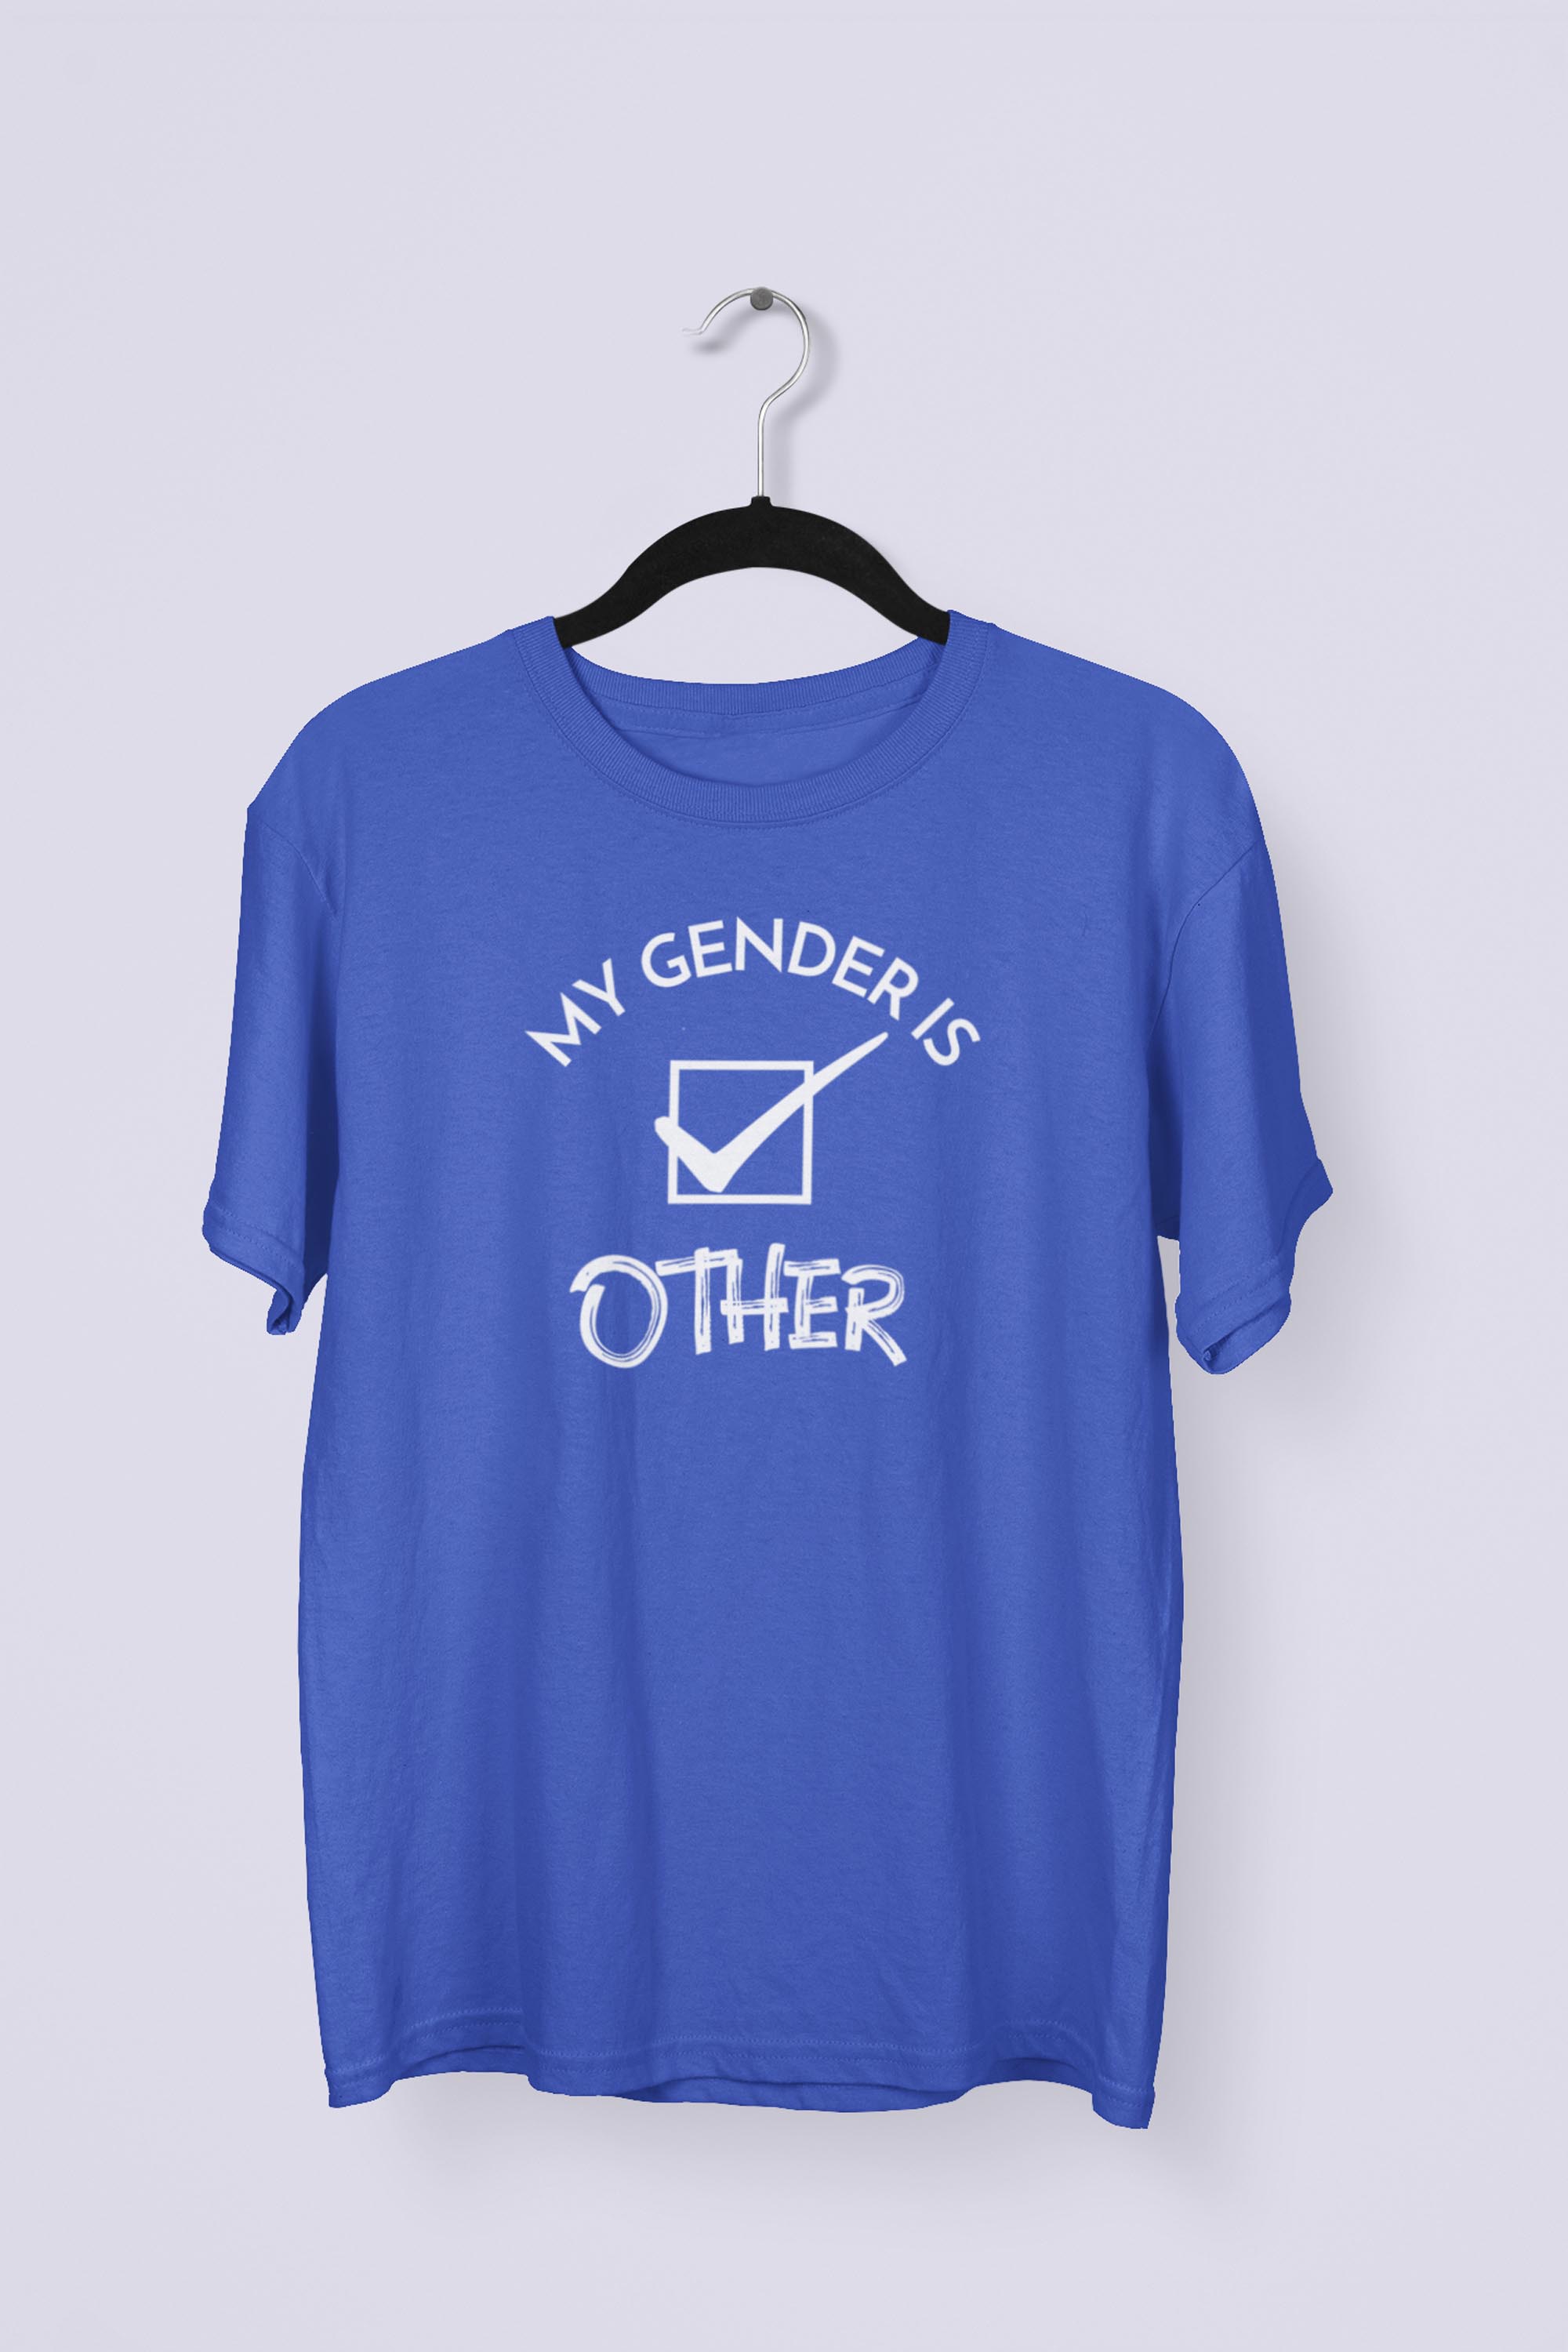 My Gender is Other T-shirt - Royal Blue